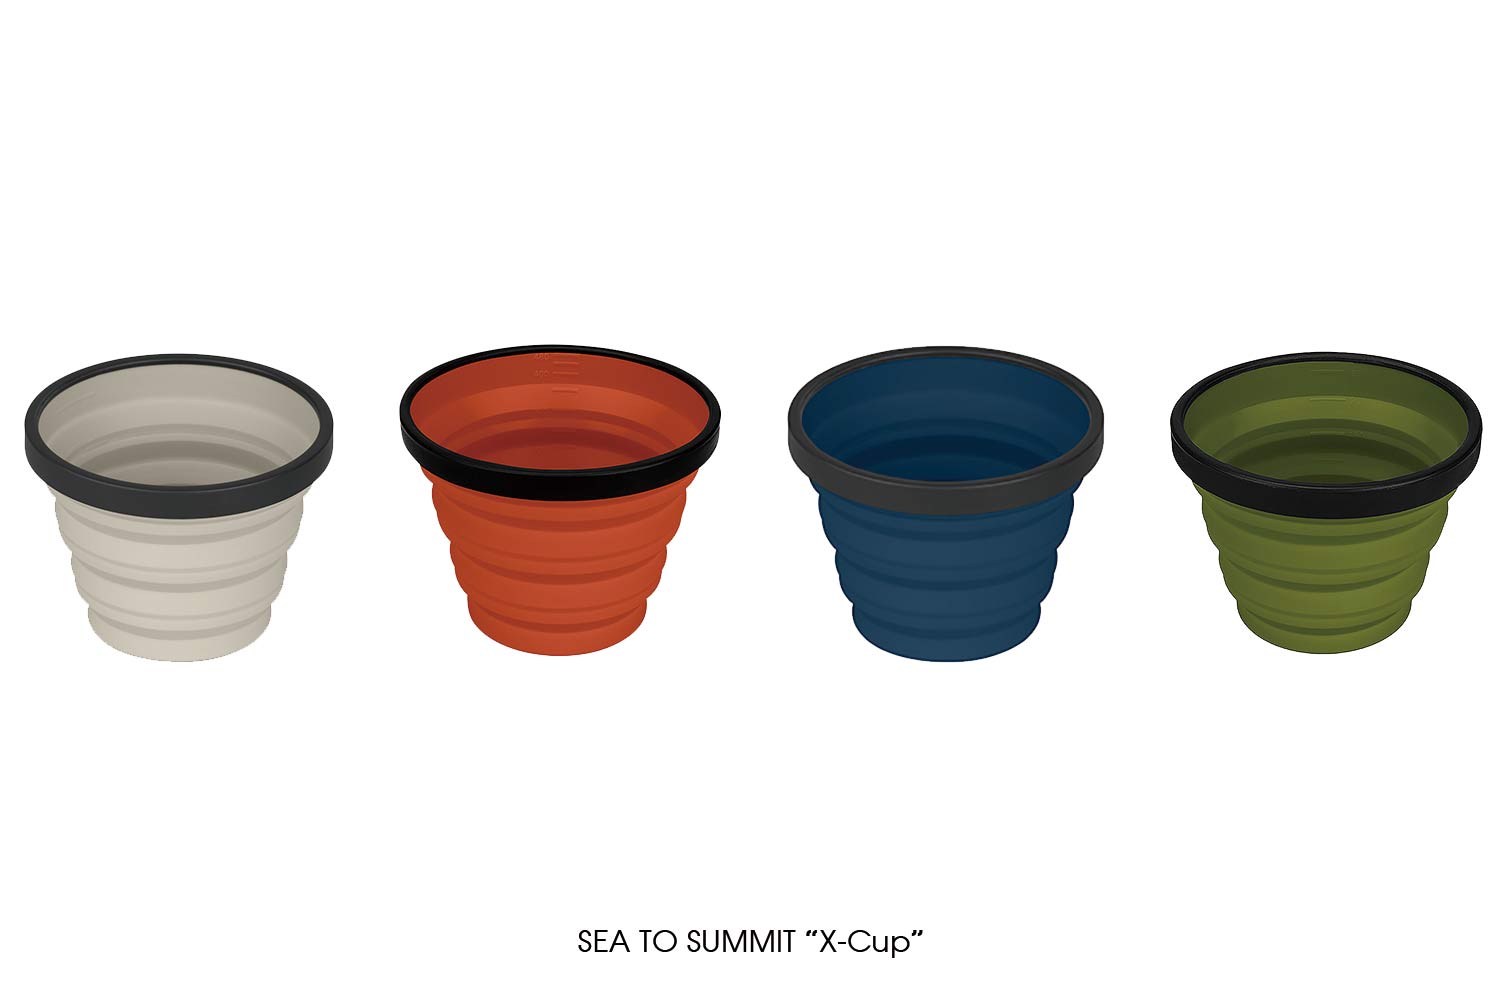 SEA TO SUMMIT "X-Cup"